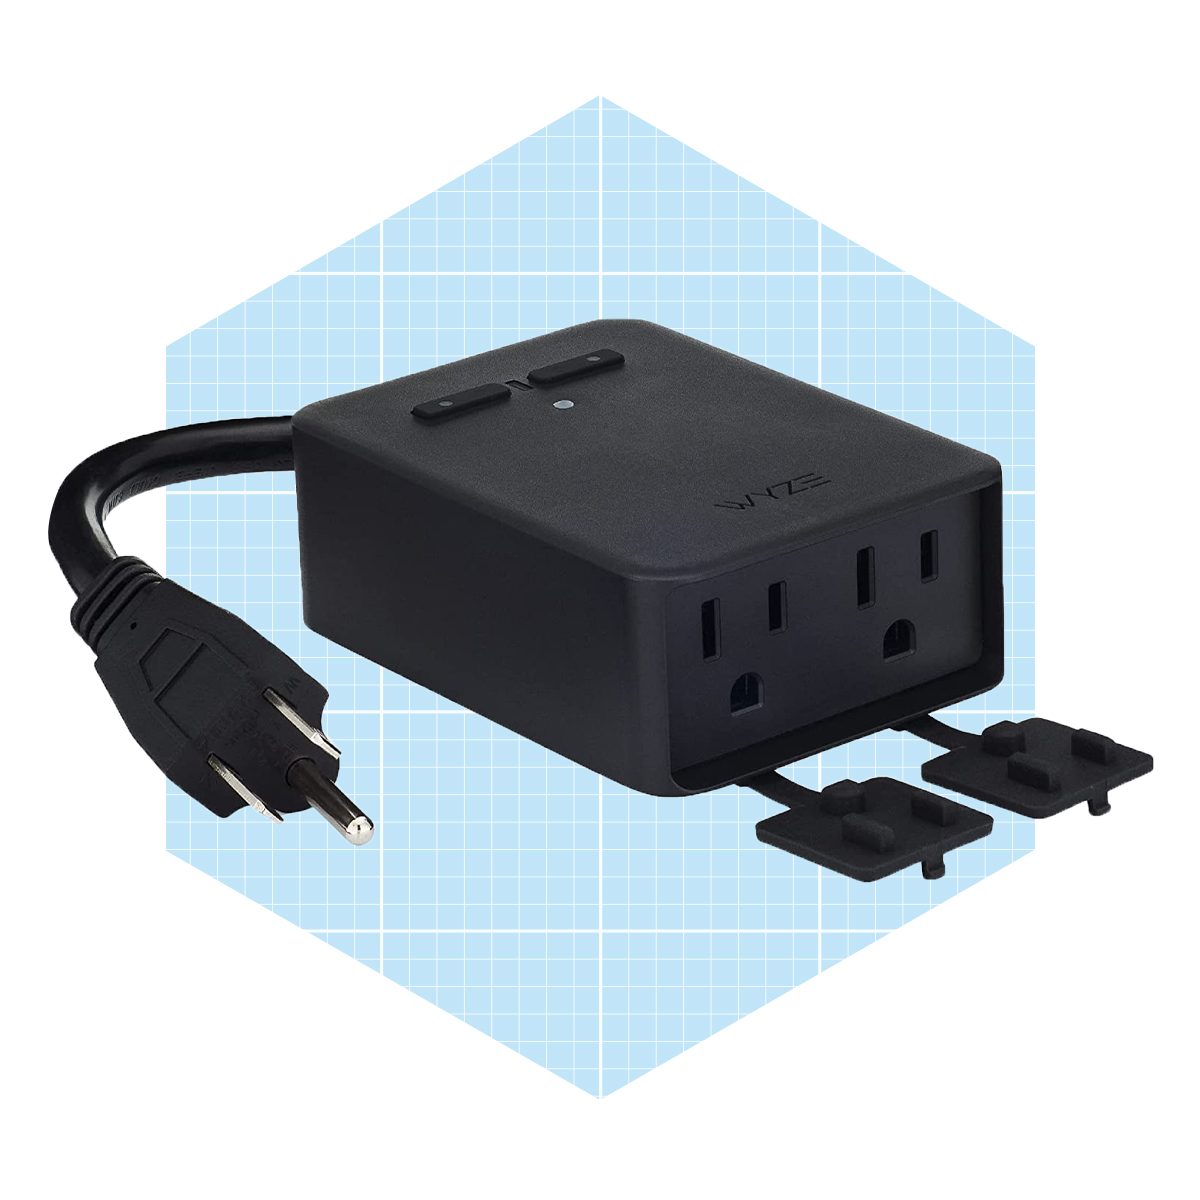 Wyze Plug Outdoor Dual Outlets Energy Monitoring Ecomm Amazon.com